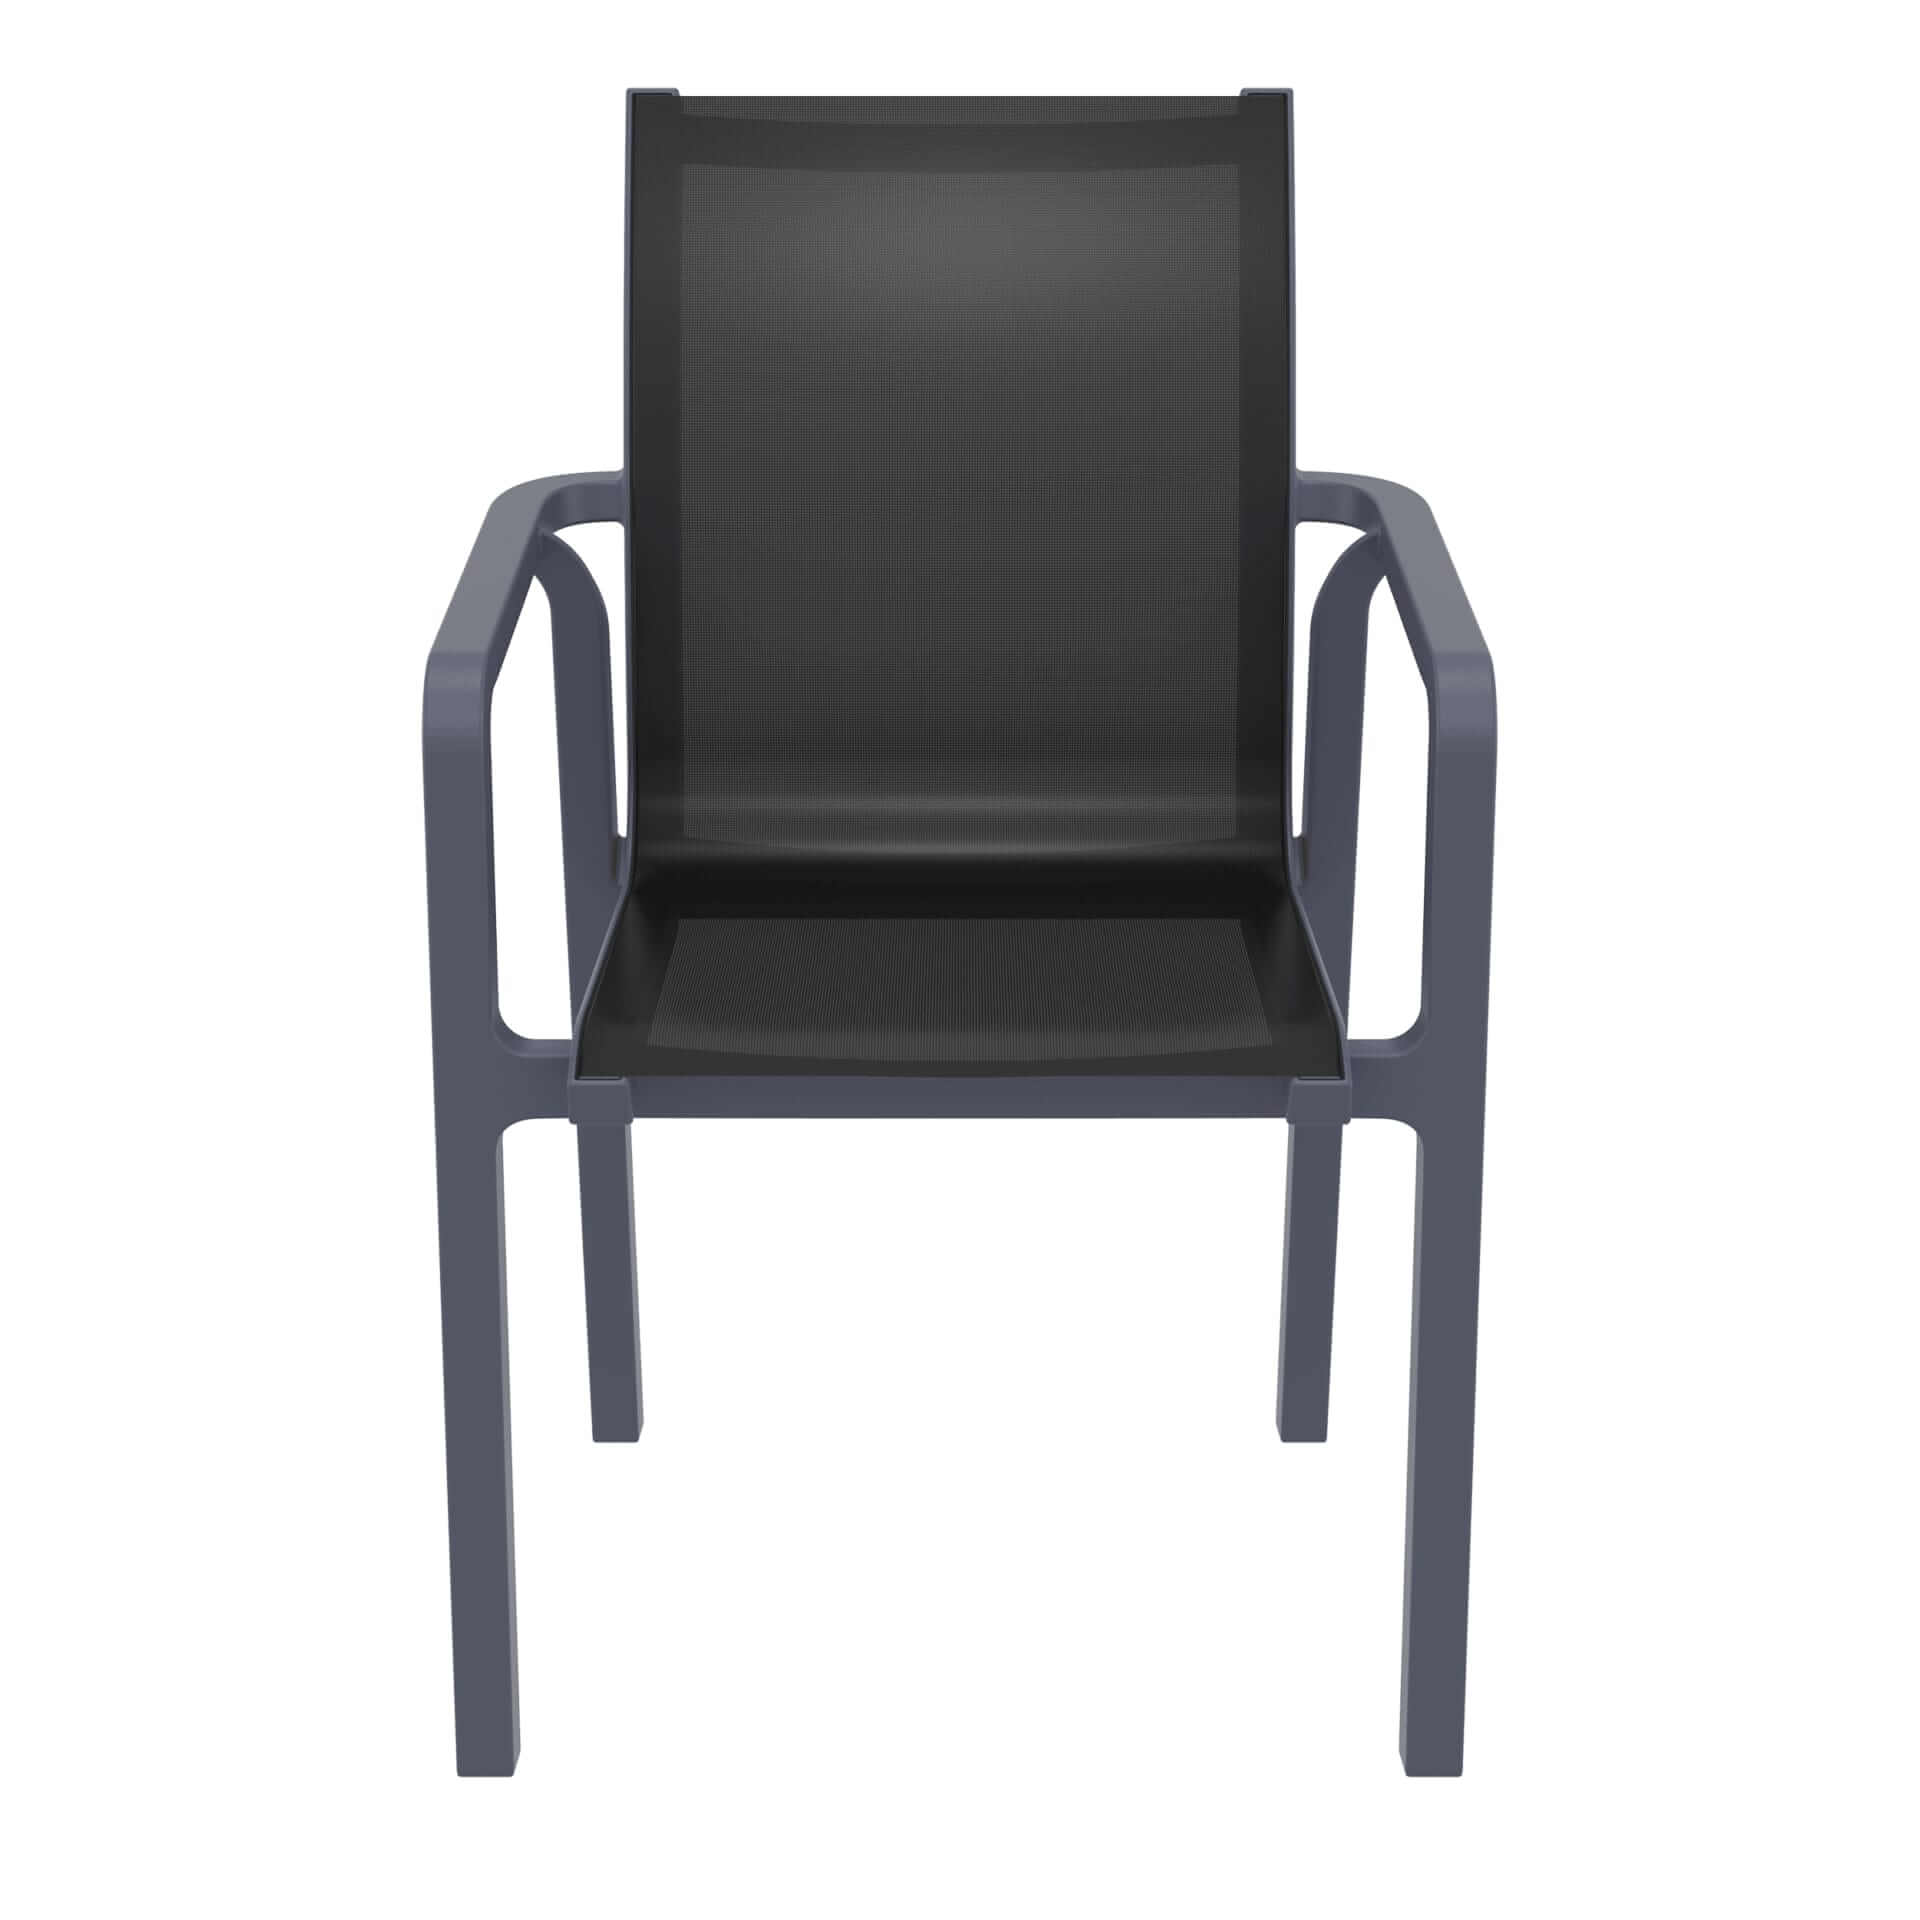 Derby | Modern, Stackable Outdoor Dining Chairs With Arms | Set Of 2 | Dark Grey